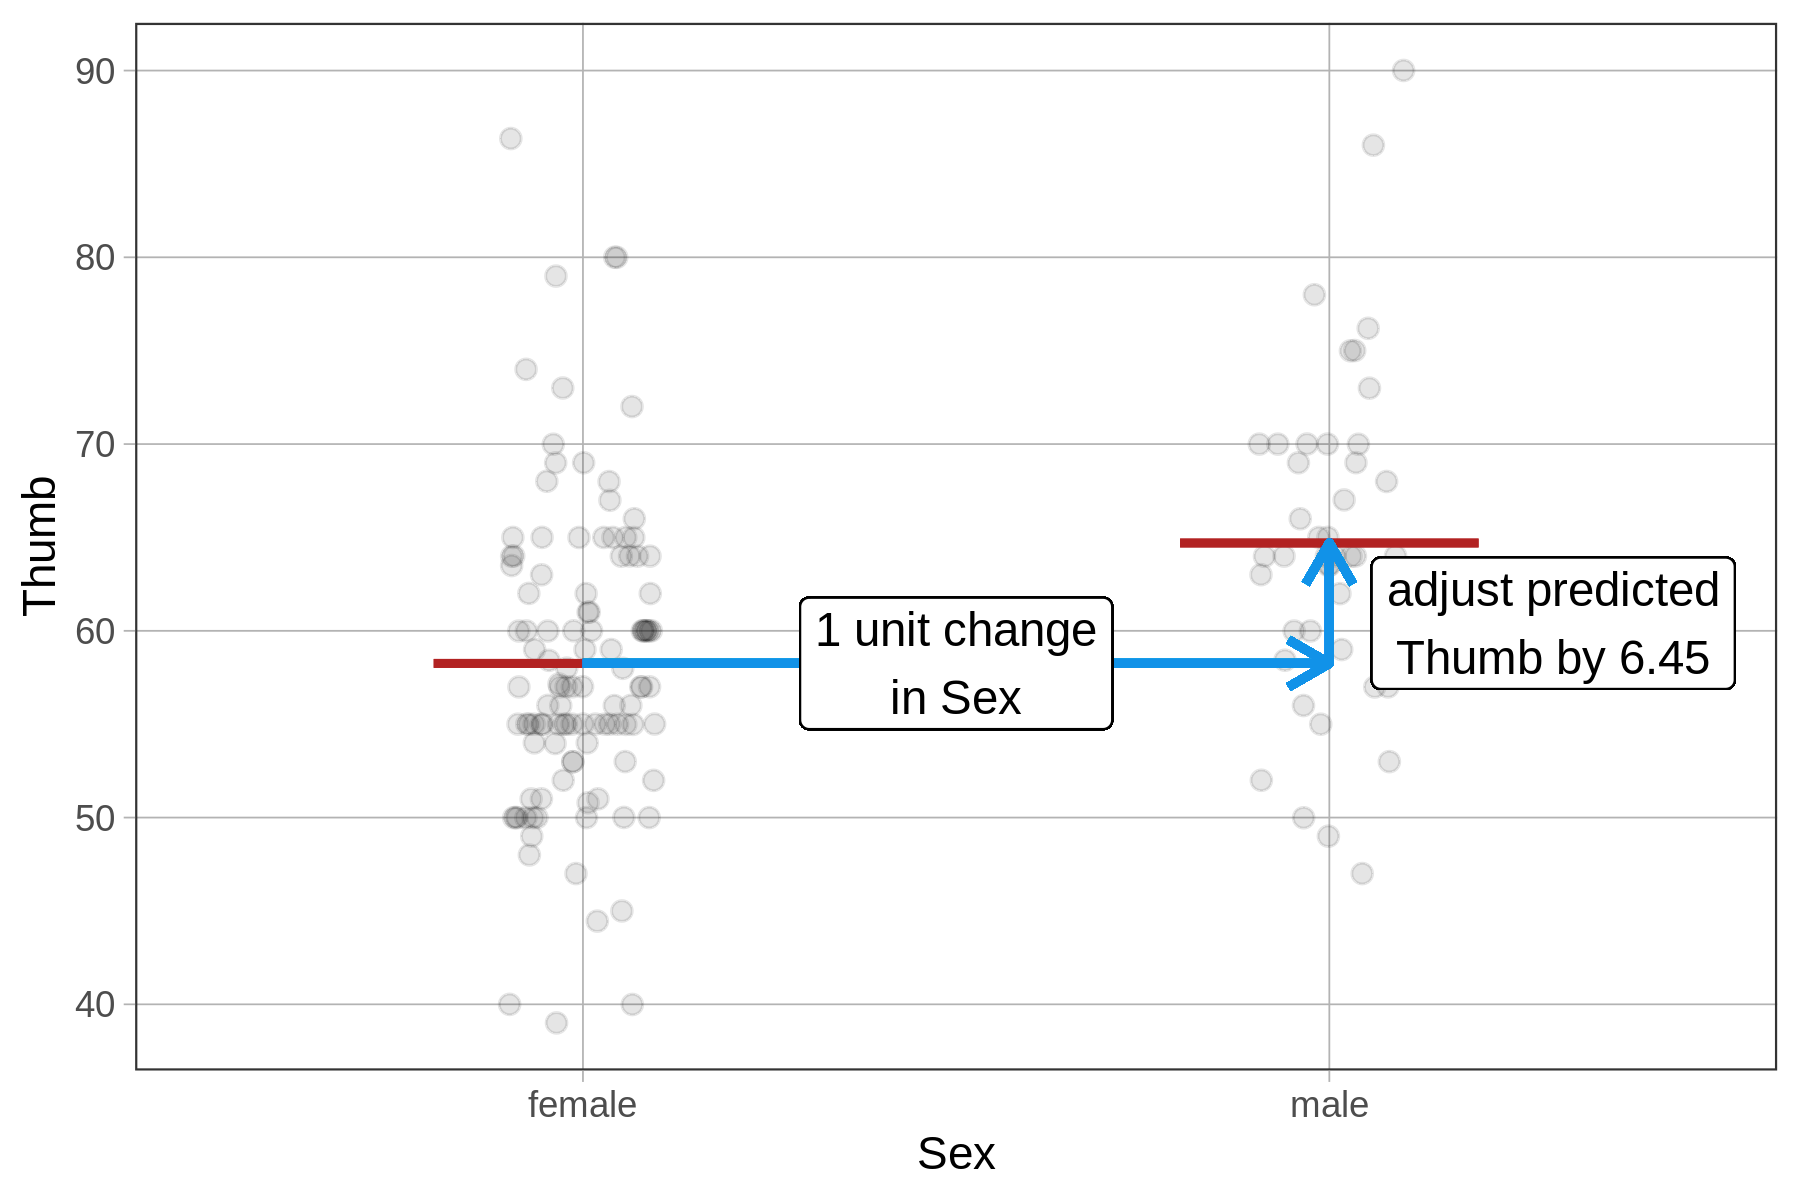 On the left, a representation of b-sub-one of the Sex model, a group model, as a jitter plot of Thumb predicted by Sex (female and male), with the model overlaid as horizontal lines at the mean of each group. The horizontal distance between each group is labeled as the one unit change in Sex, and the vertical distance between each group mean is labeled to say that we adjust predicted Thumb by 6.45.